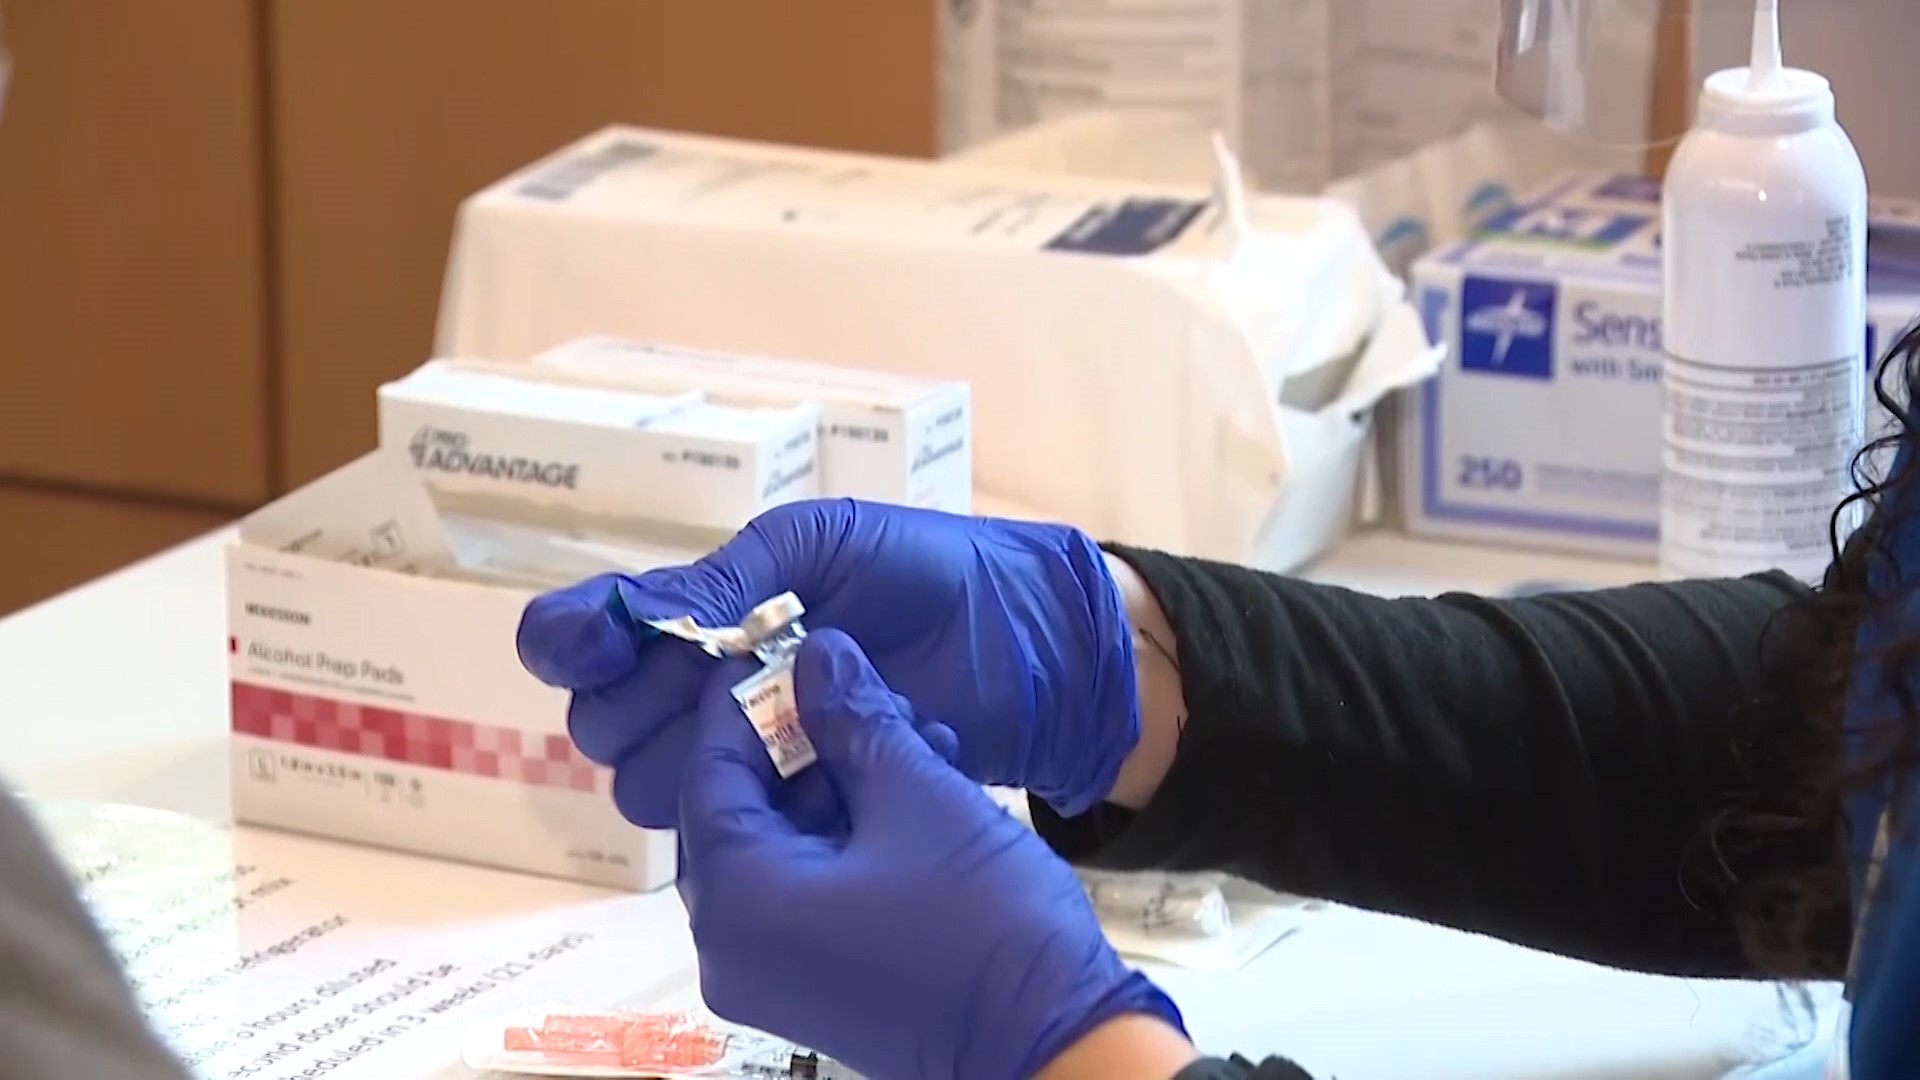 Kaiser Permanente, among multiple health care providers, is trying to accommodate the new influx of eligible people who can get vaccinated.